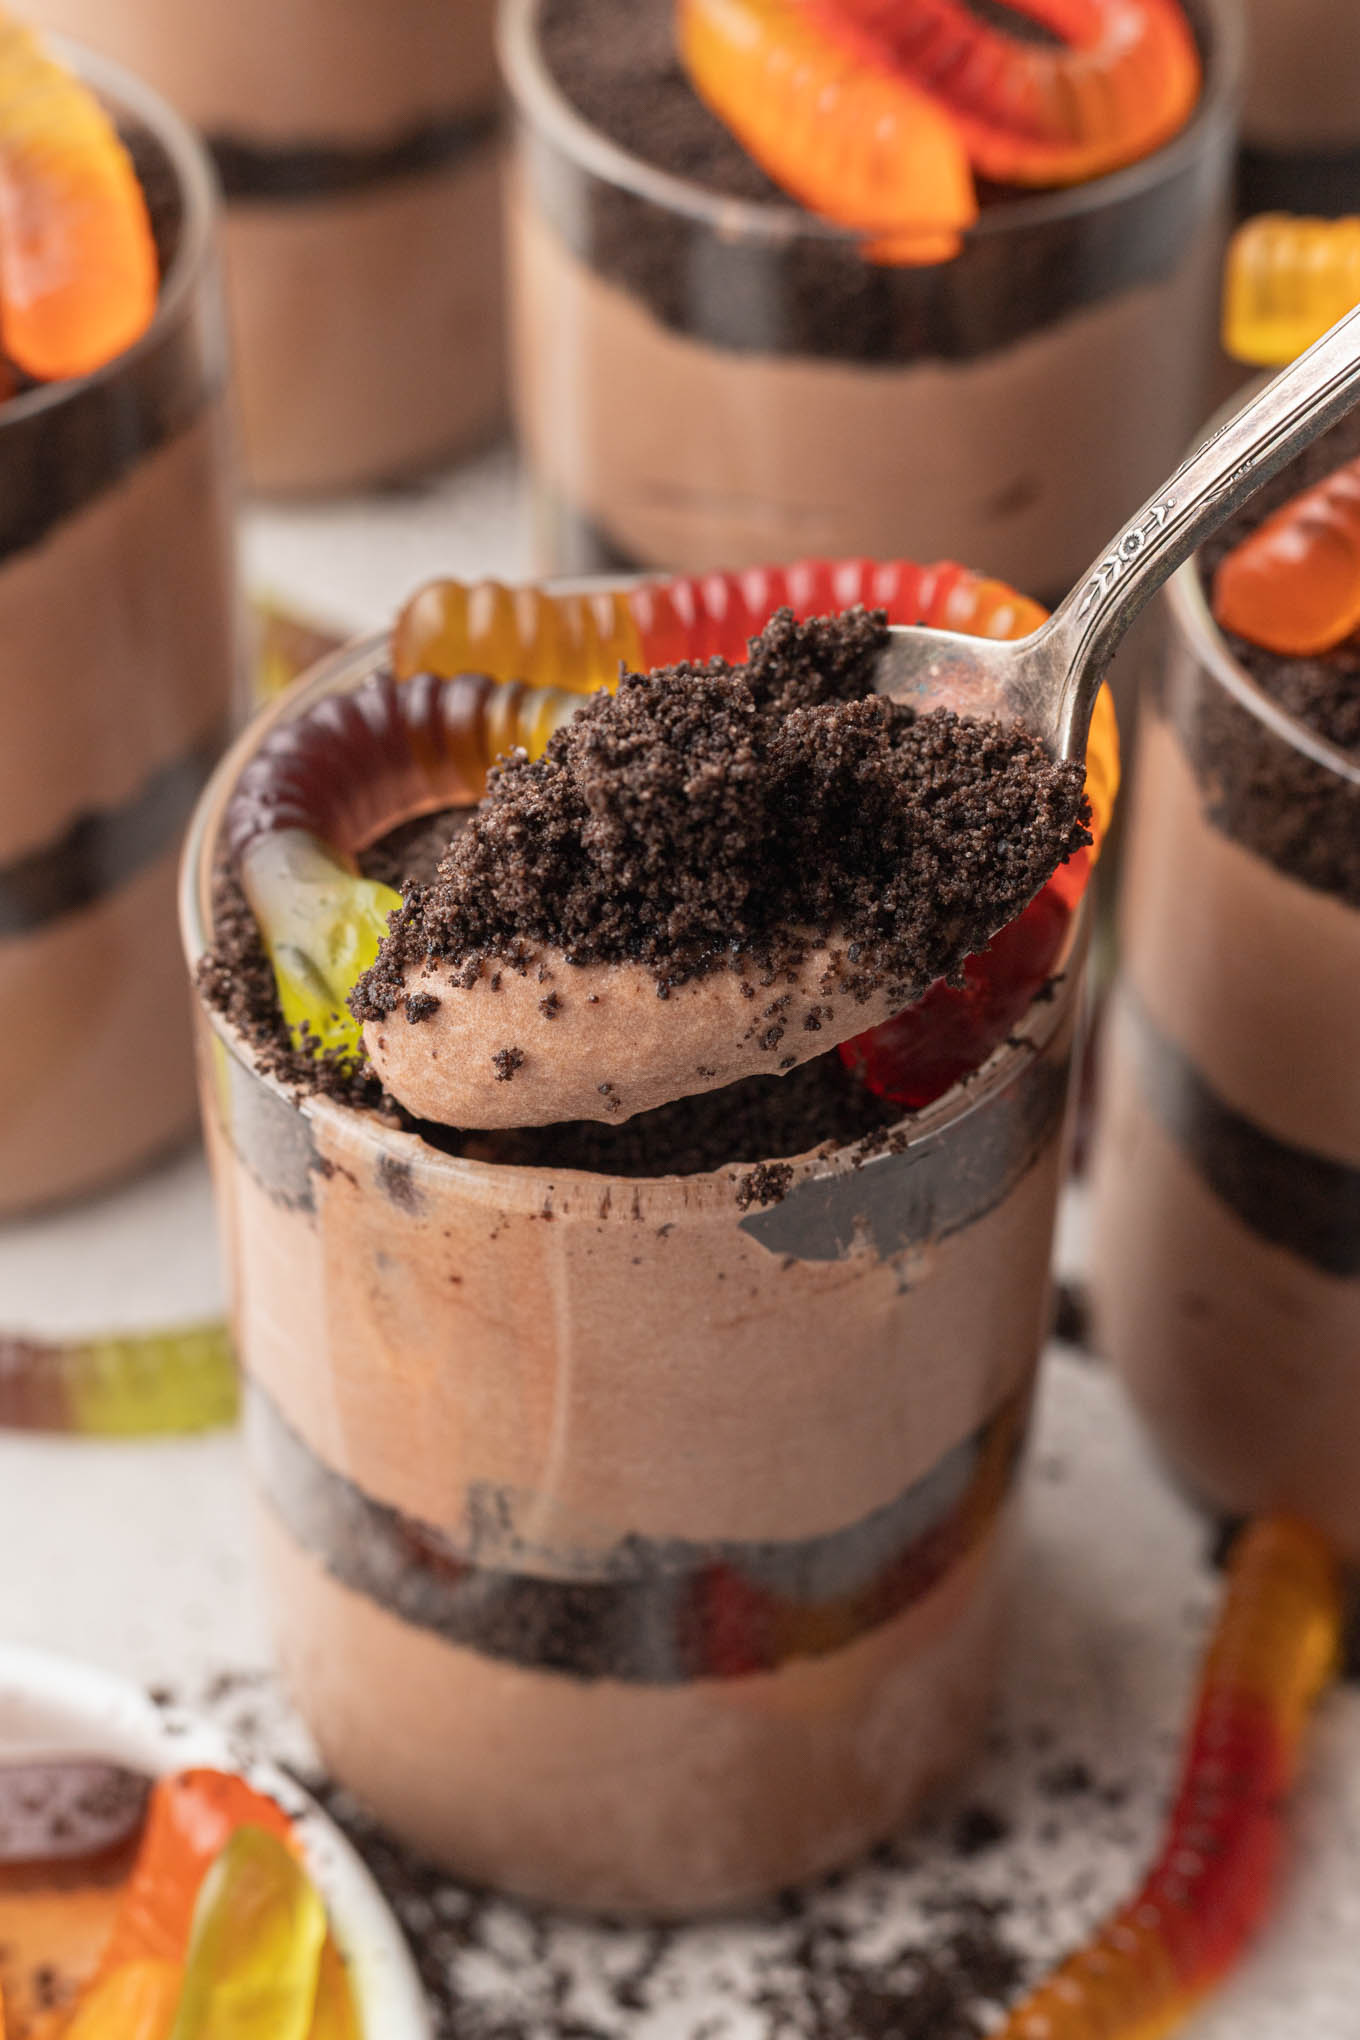 A spoonful of chocolate pudding and Oreo crumbs, from a cup of dirt. 